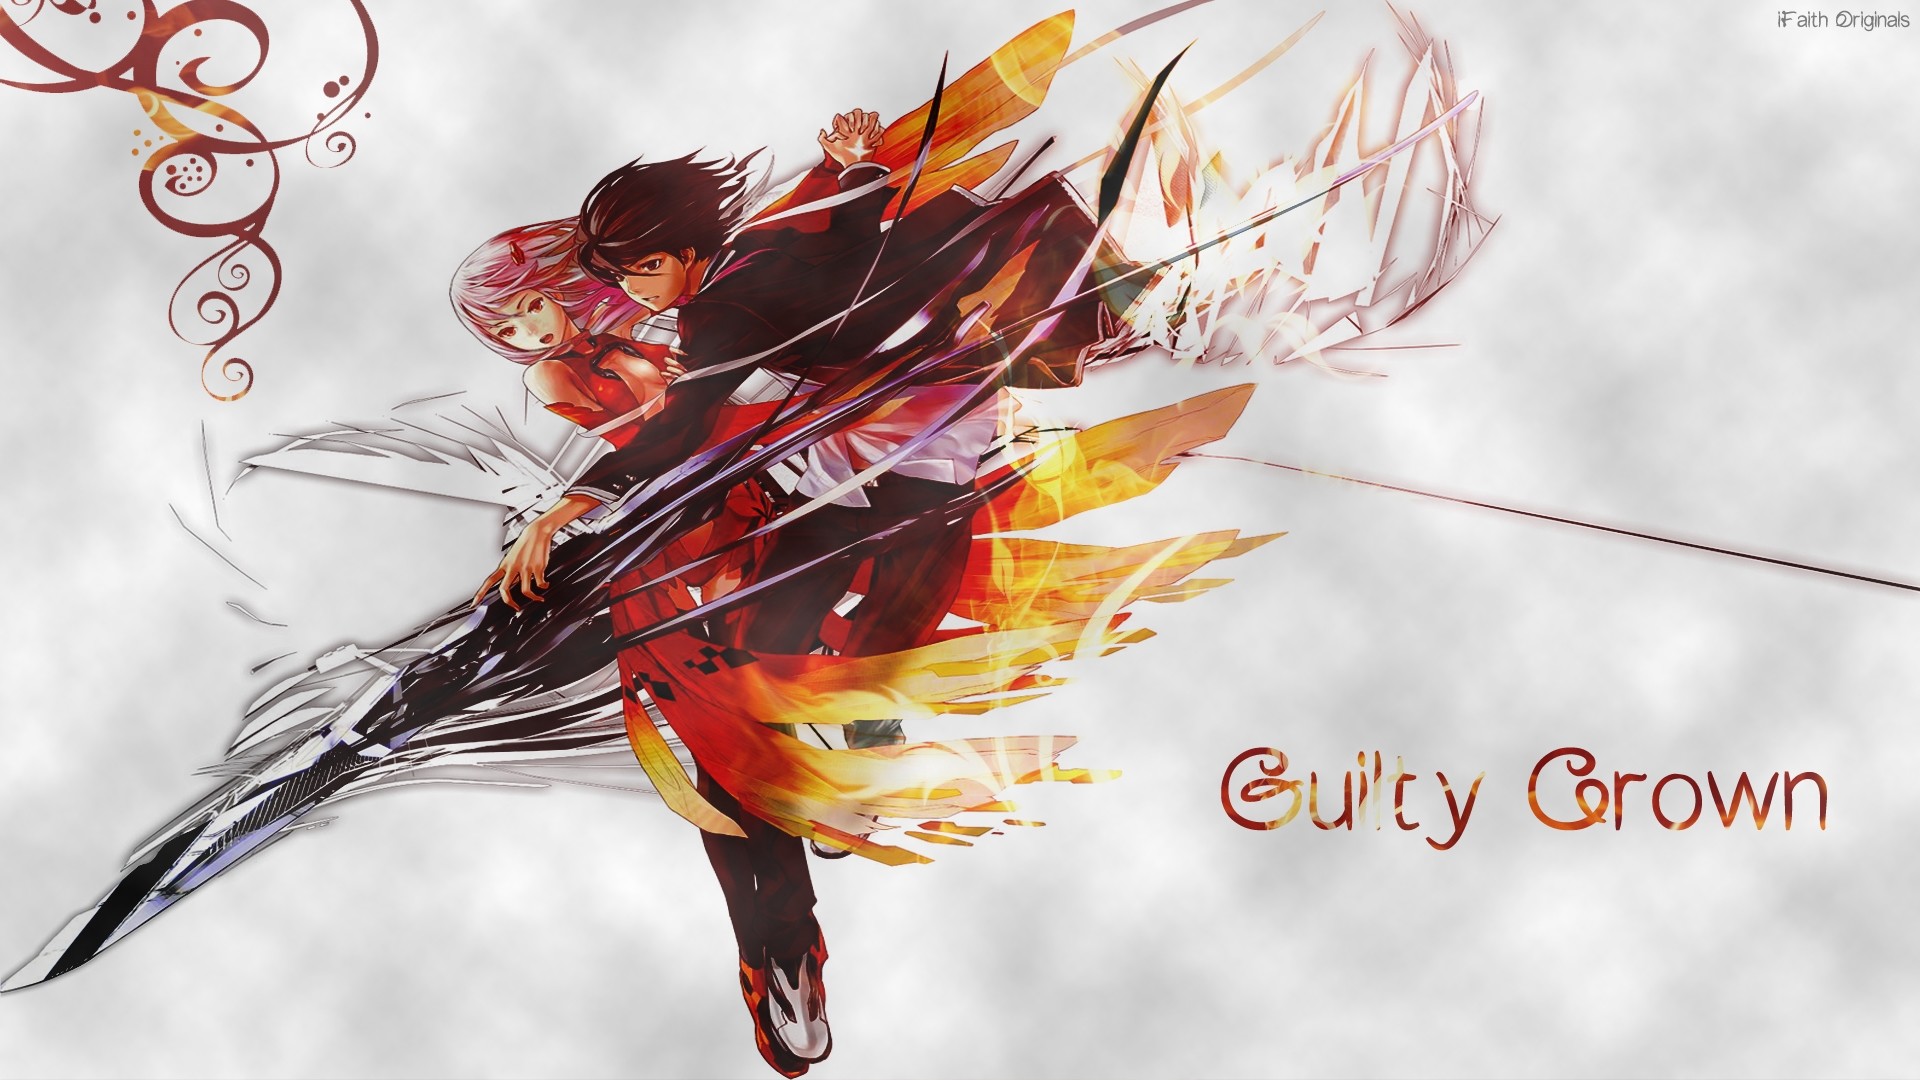 1920x1080 ... 72 Guilty Crown HD Wallpapers | Backgrounds - Wallpaper Abyss ...